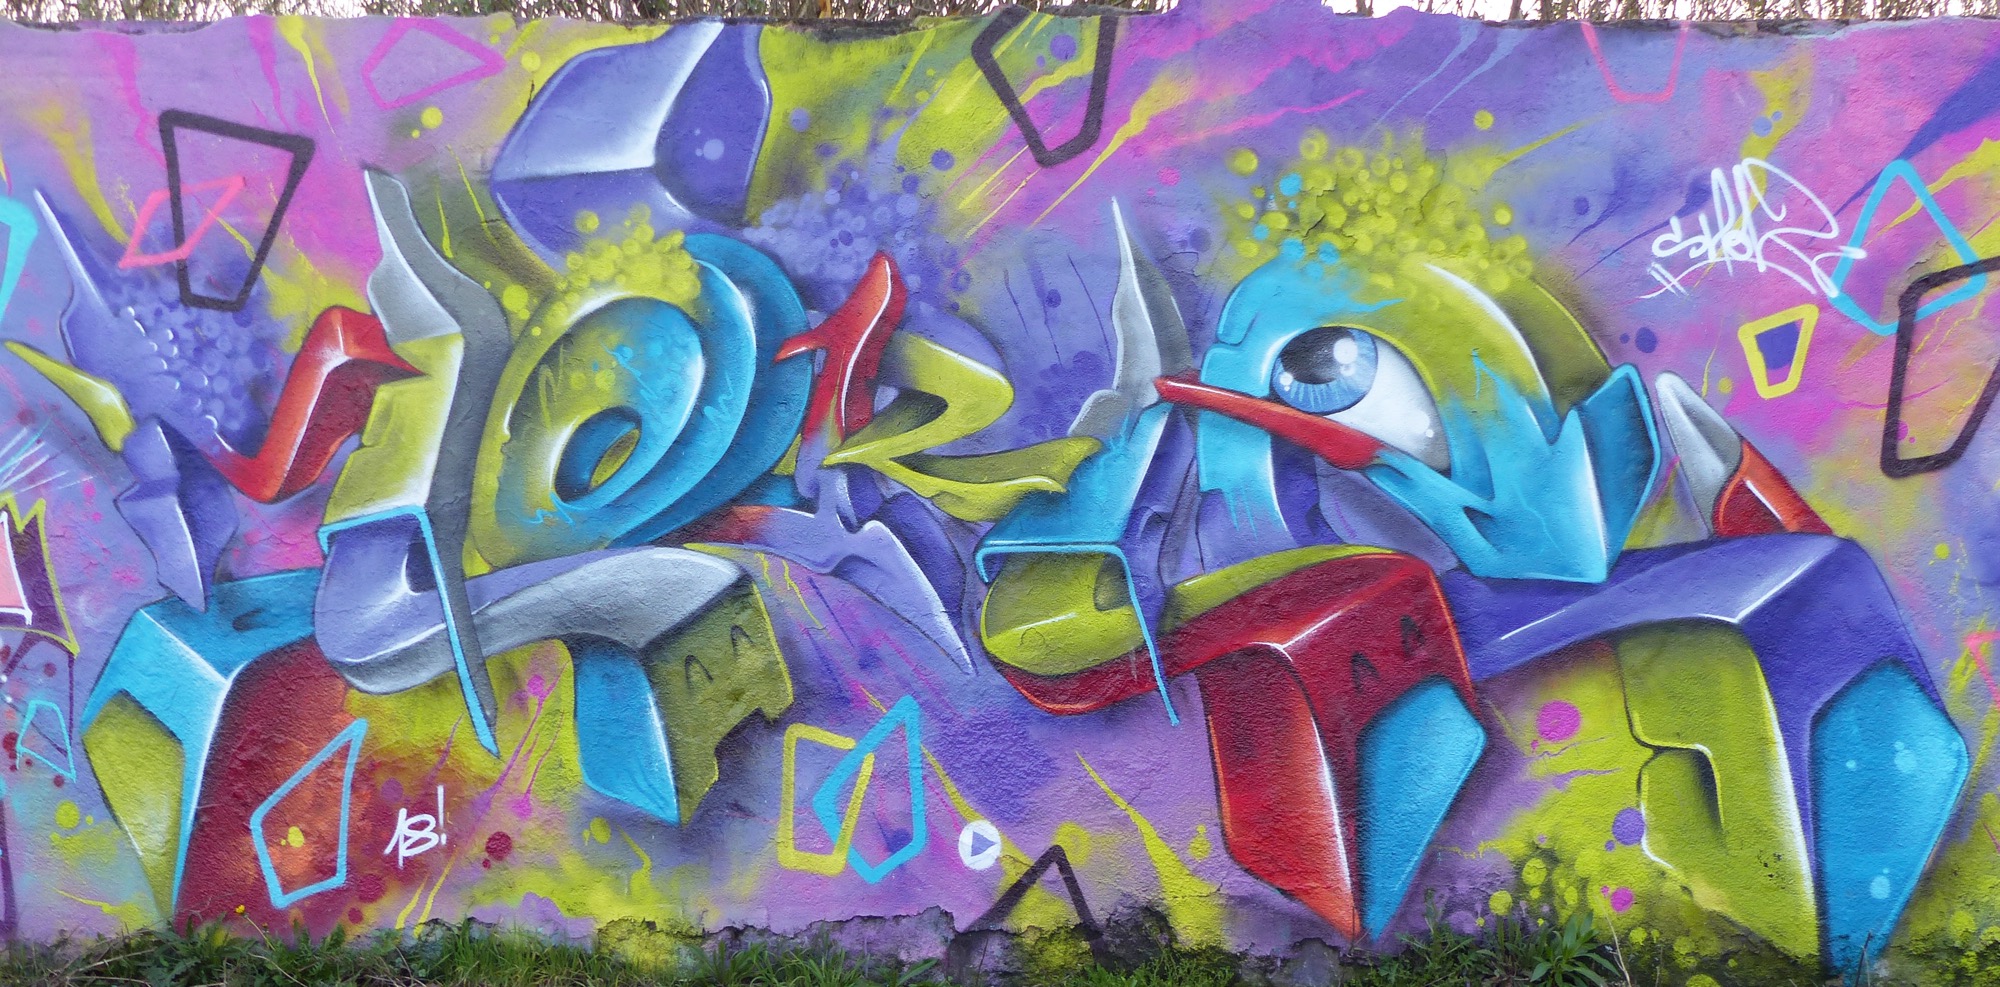 Graffiti 27  captured by Rabot in Nantes France